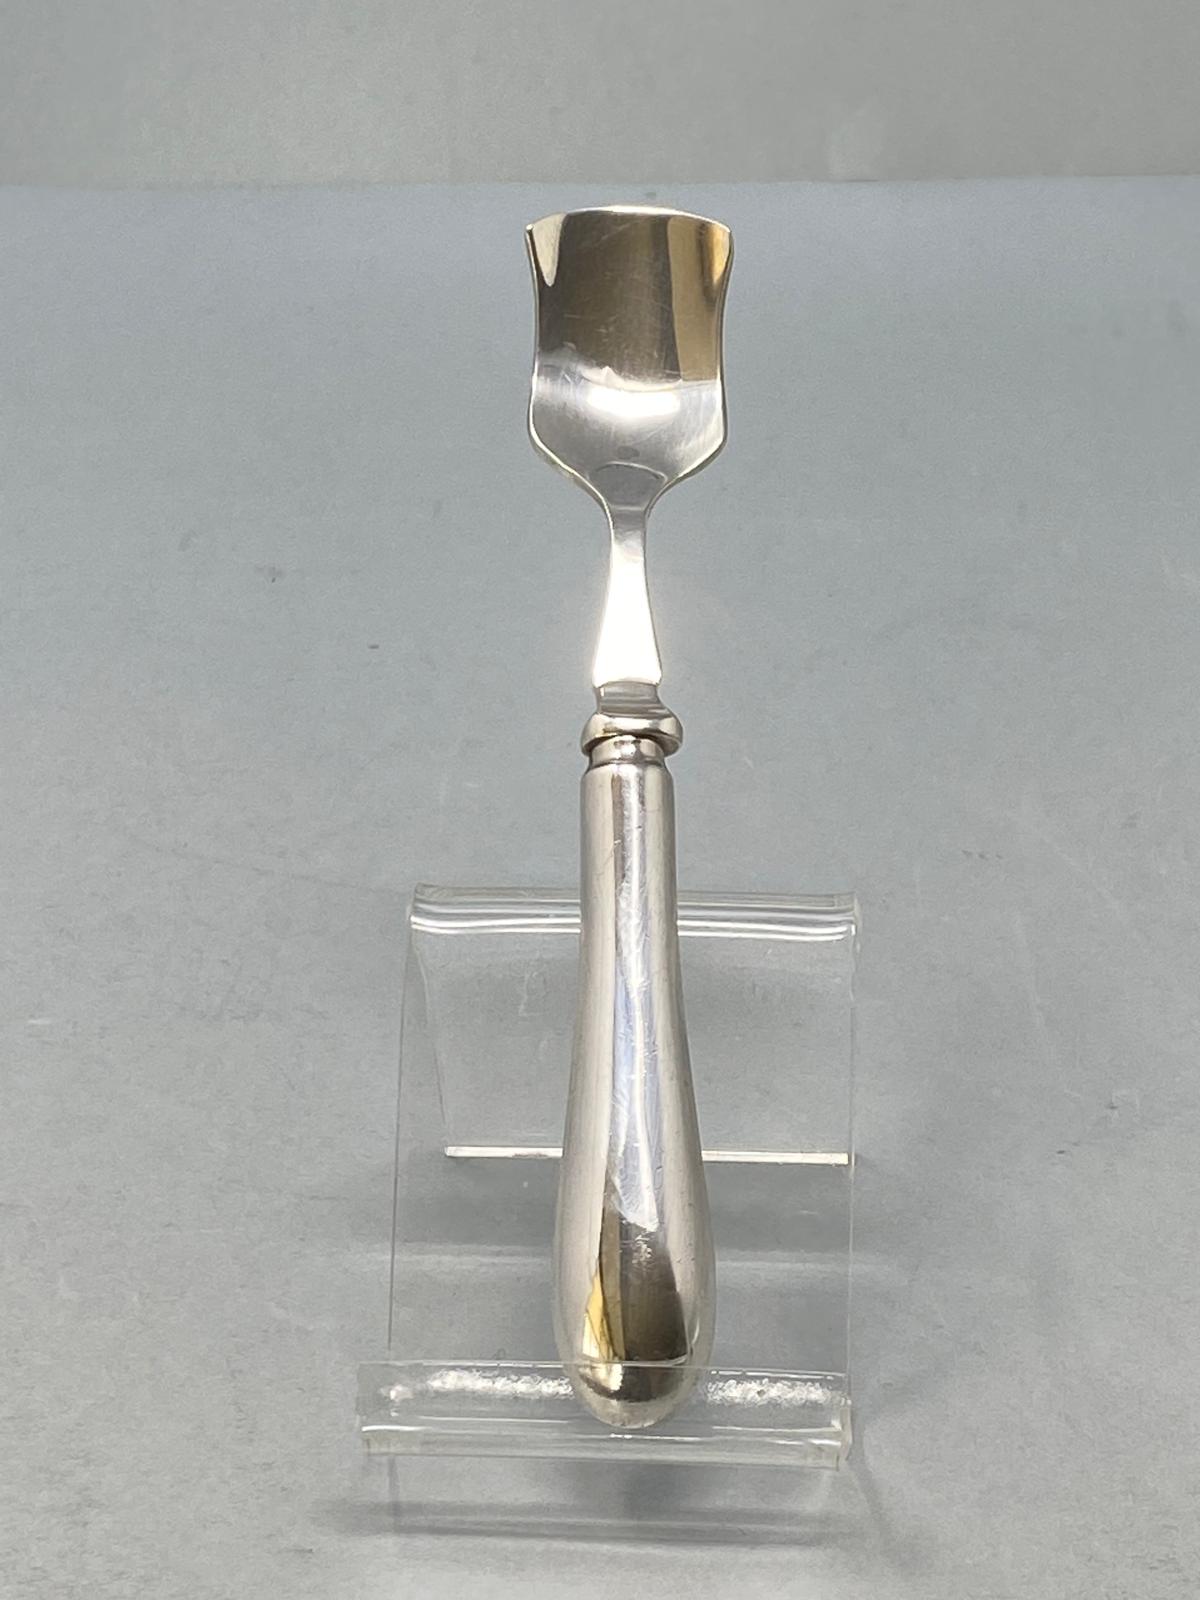 Silver Plated Jam/Preserve Spoon